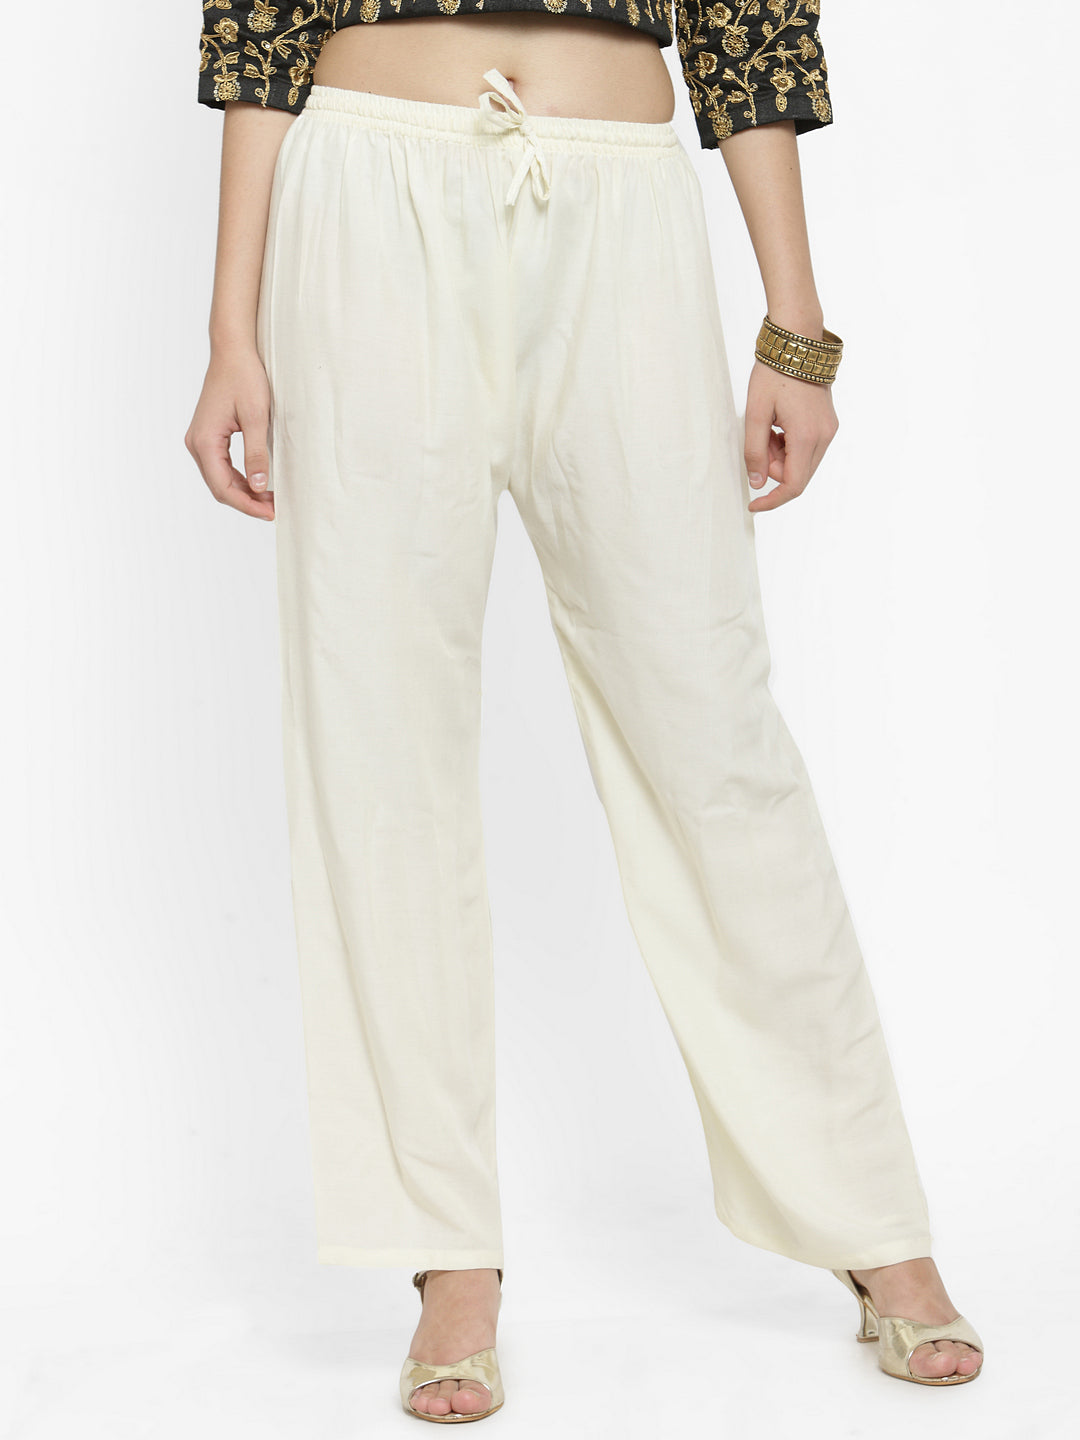 Women's Off-White Solid Rayon Palazzo - Wahe-NOOR